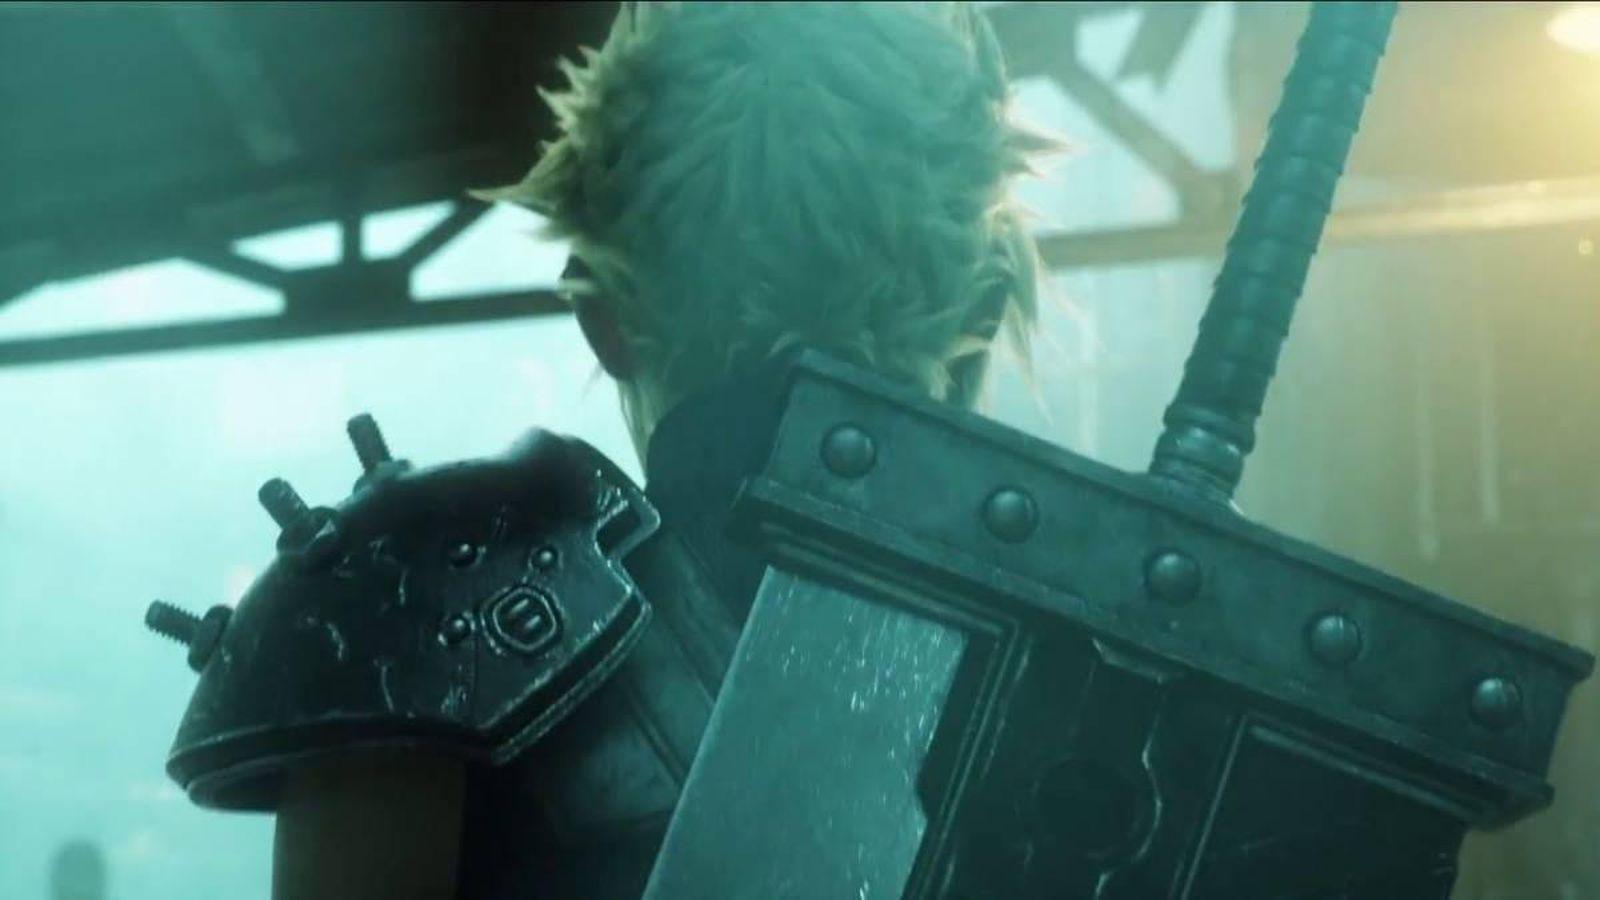 Final Fantasy 7 Remake was announced too early, game's director